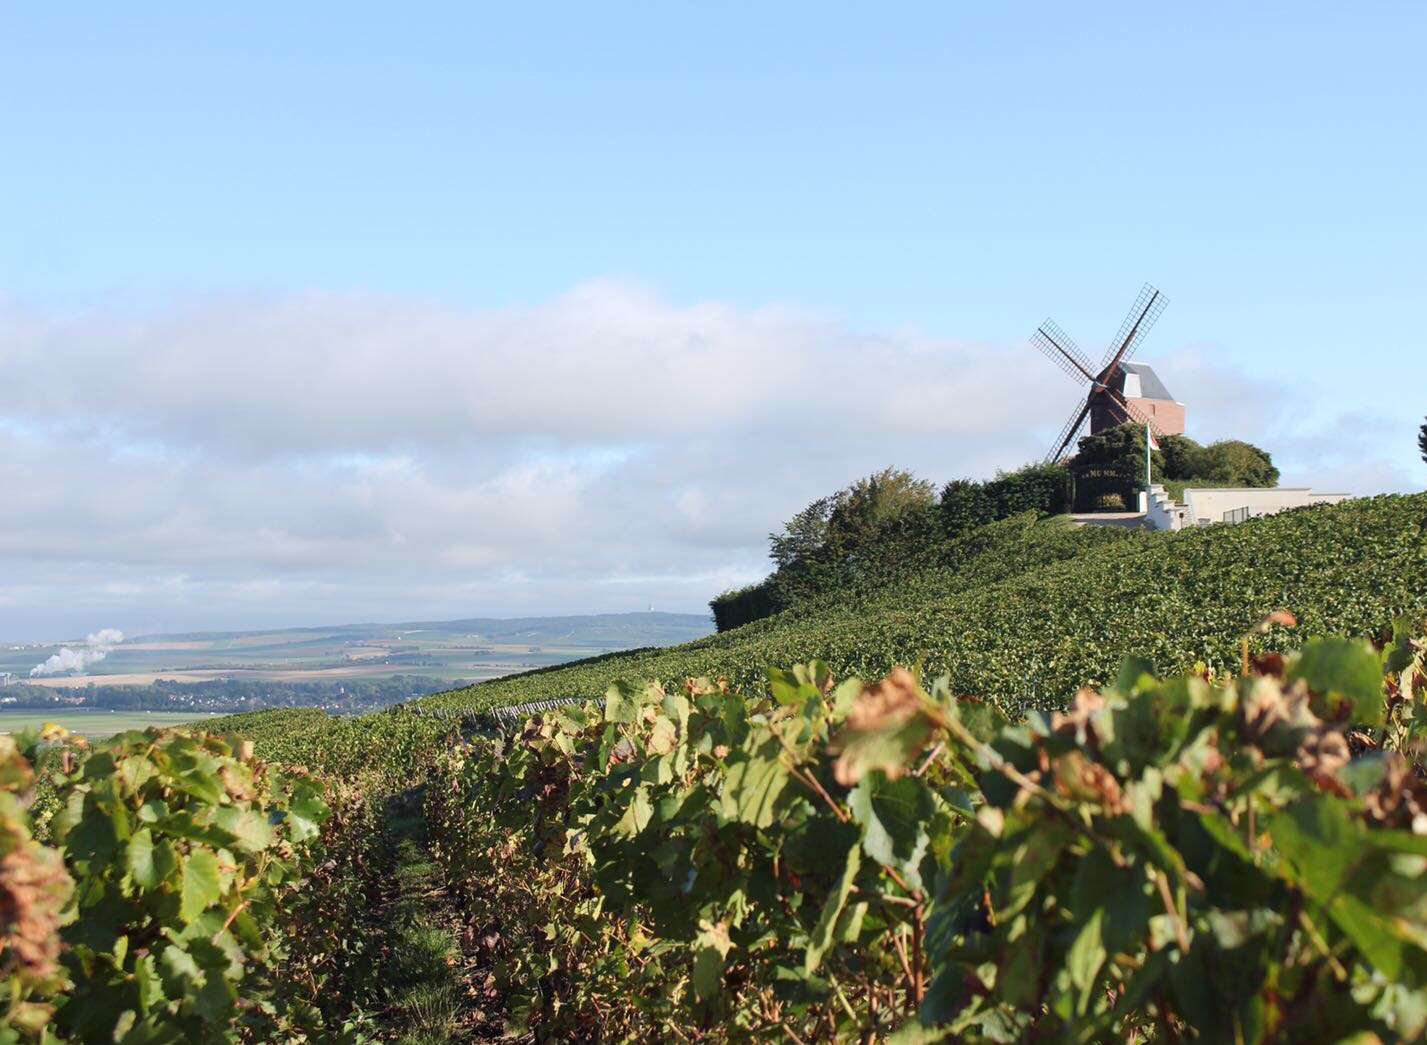 Throughout the region there is some 34,000 hectares of vineyards.